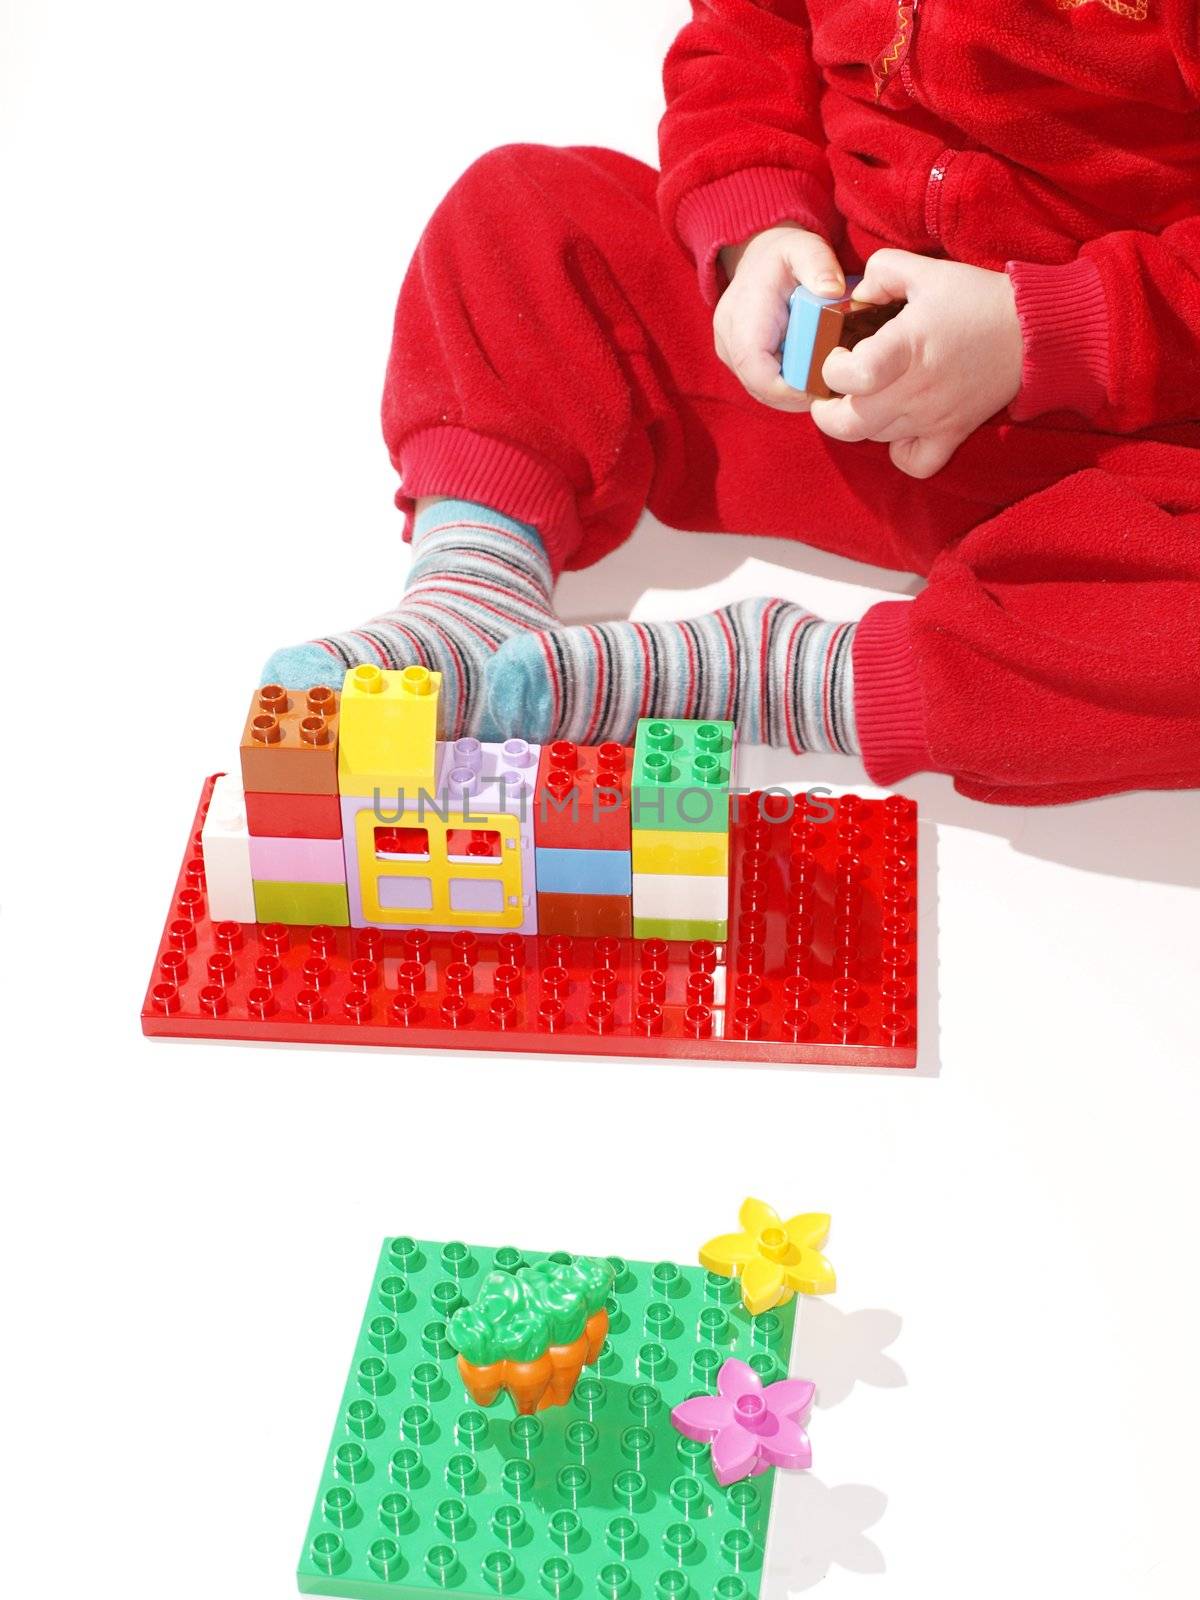 Kid in red, playing with colorful toys by Arvebettum